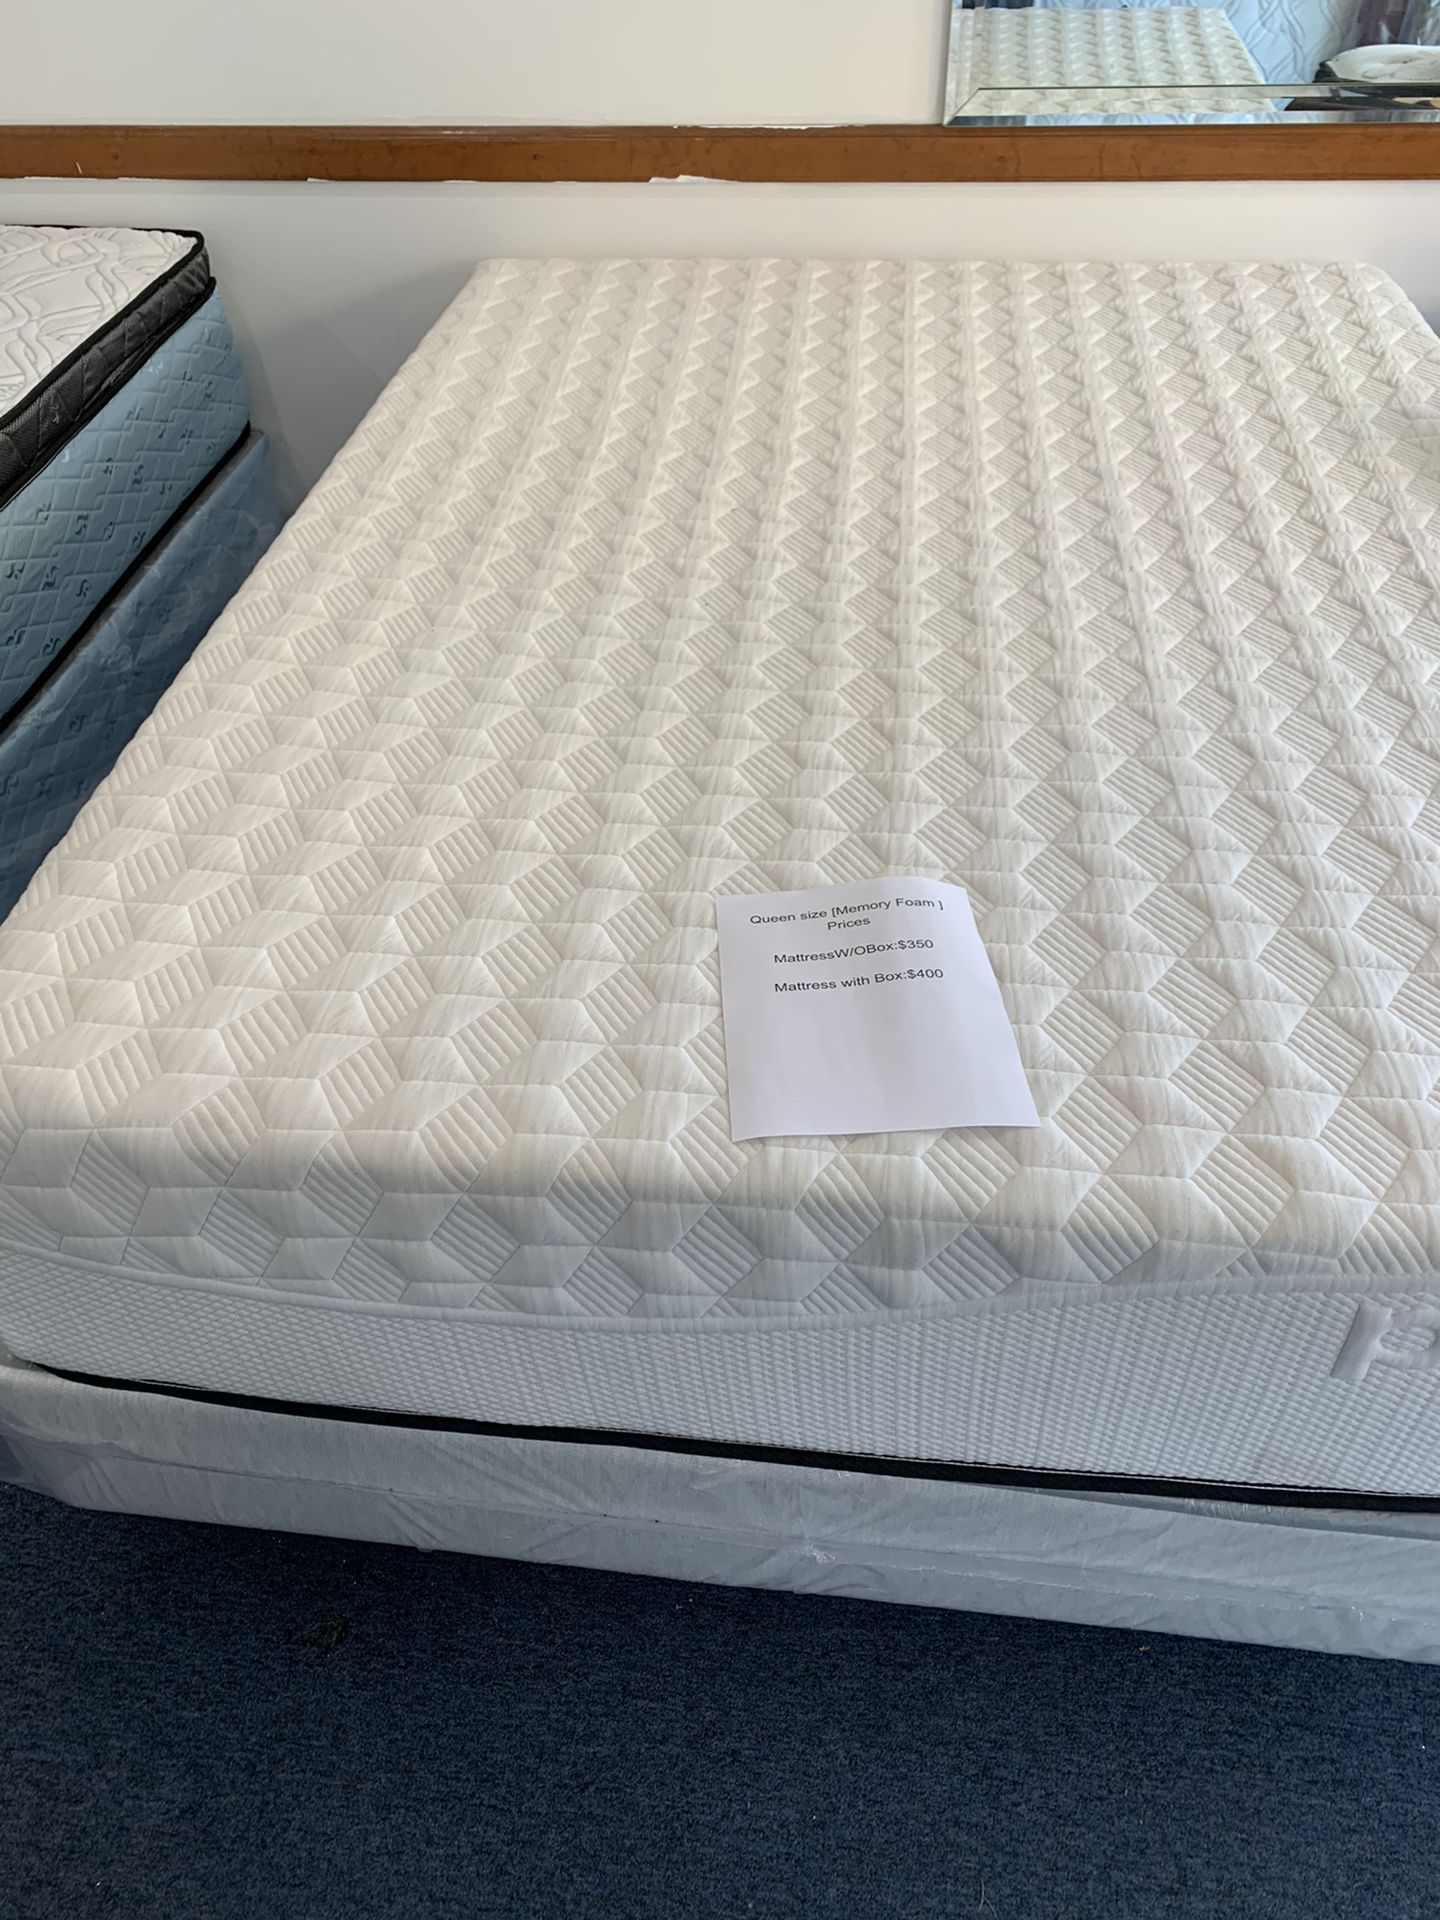 We have all sizes memory foam twin full queen and king mattress